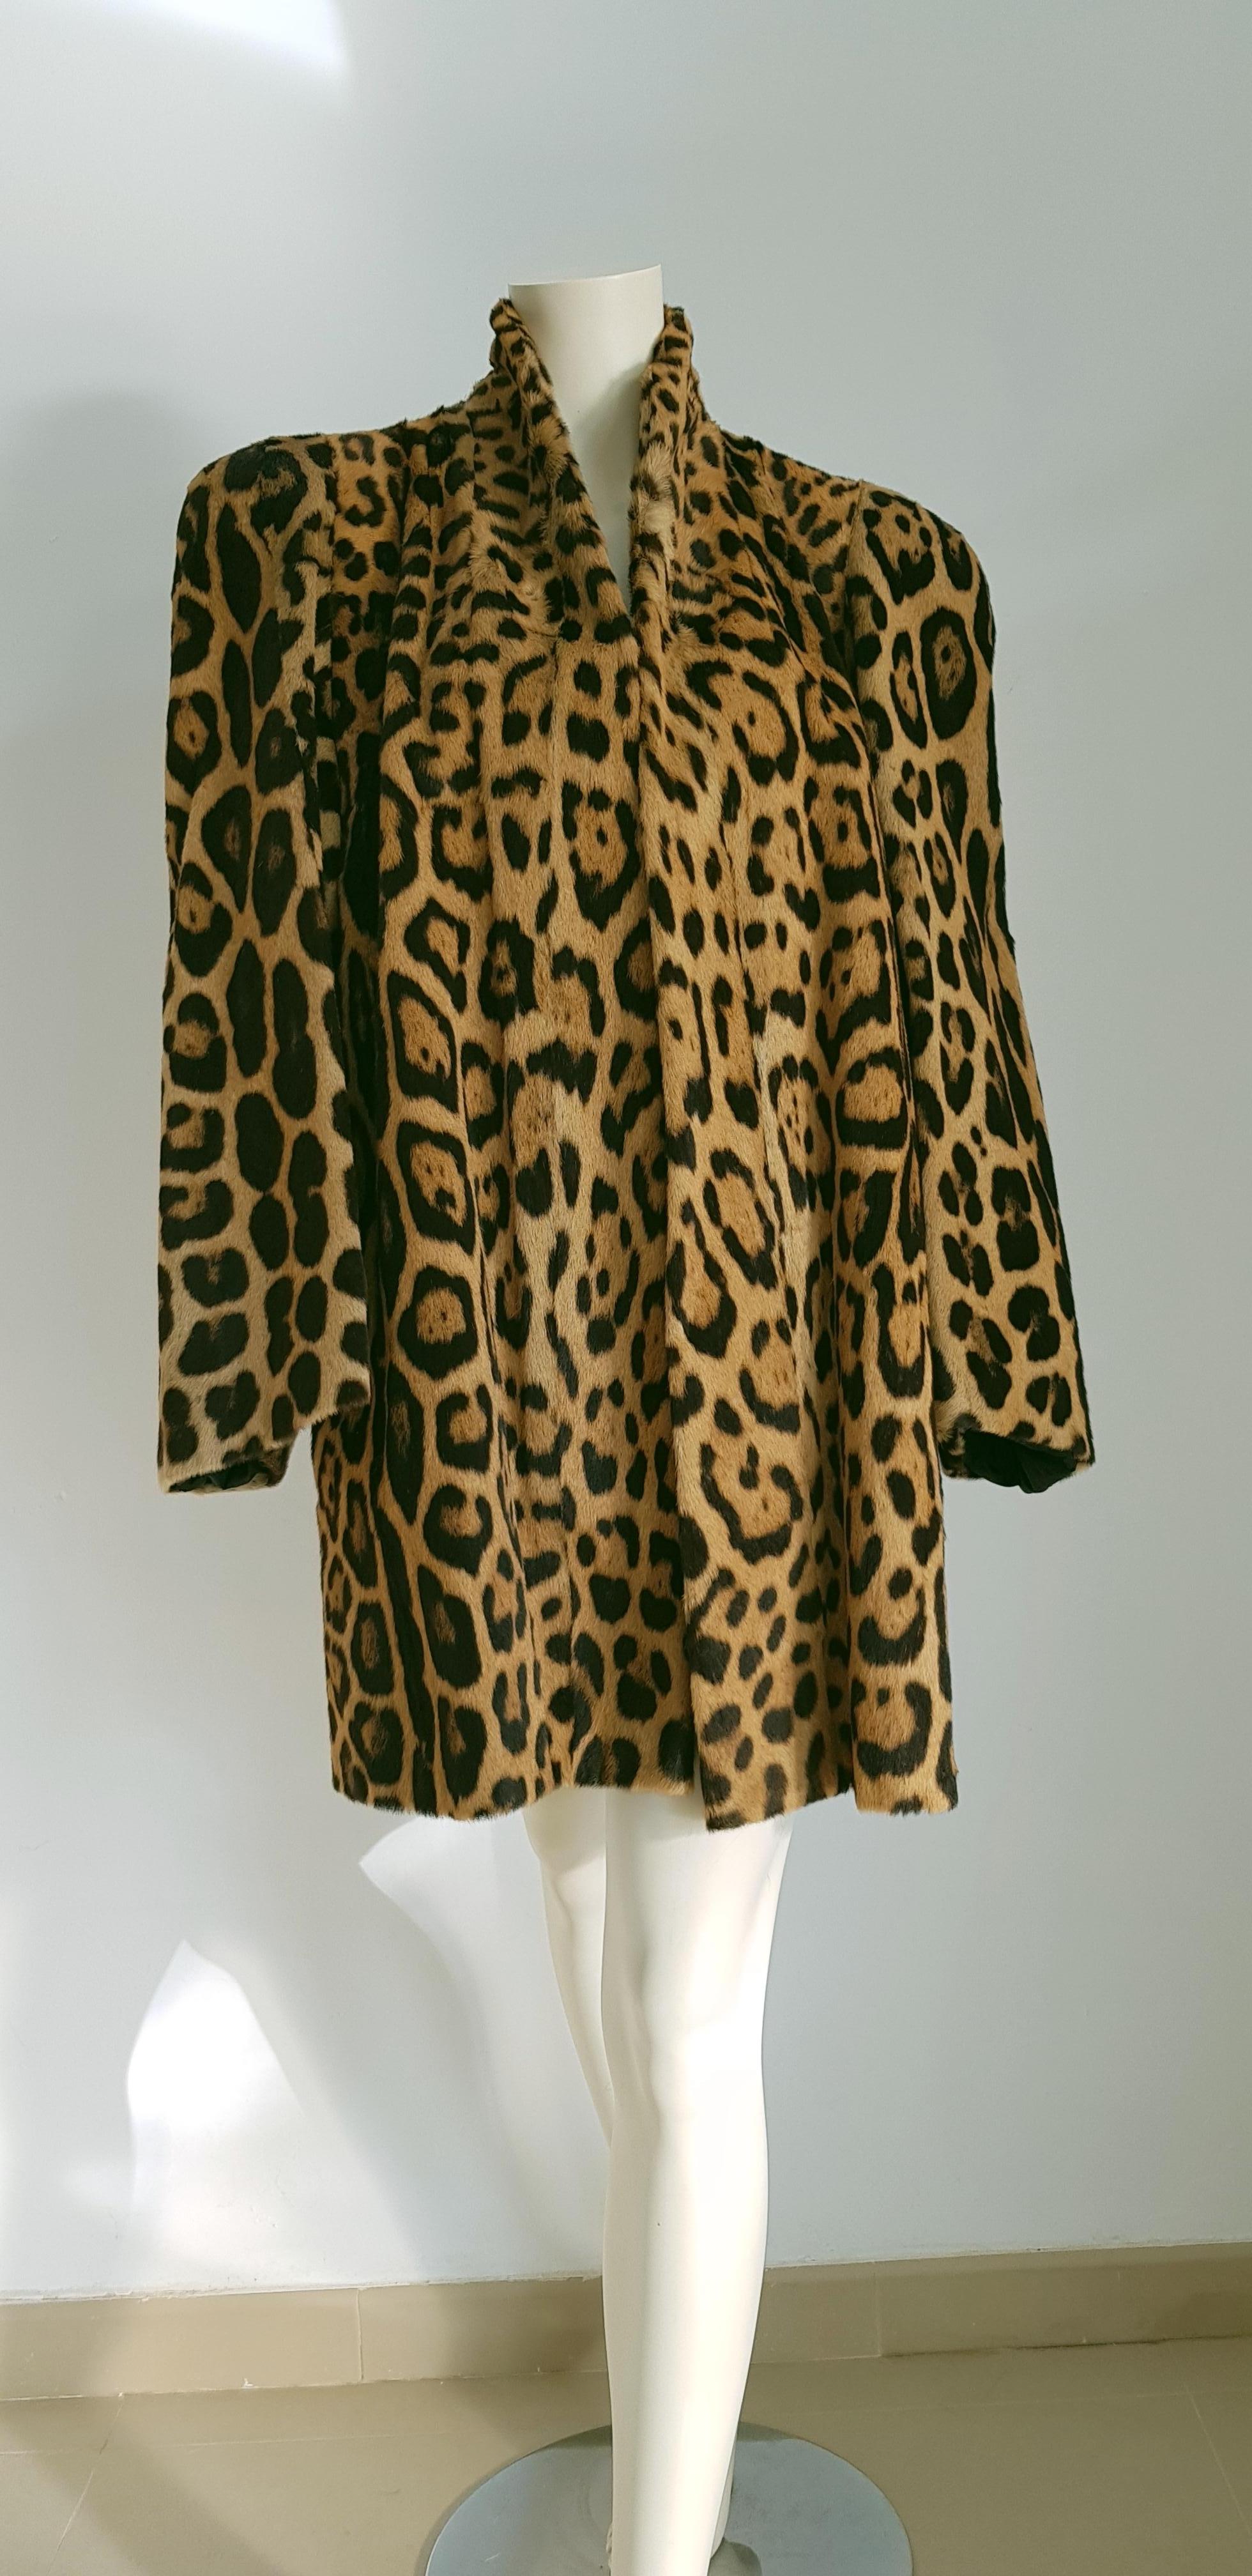 Haute Couture Manfriani Florence rare wild jaguar fur vintage coat. Pre-Ban. Black silk lined. Professionally stored - Unworn 

SIZE: equivalent to about Small Medium Large, please review approx measurements as follows in cm: lenght 97, shoulder